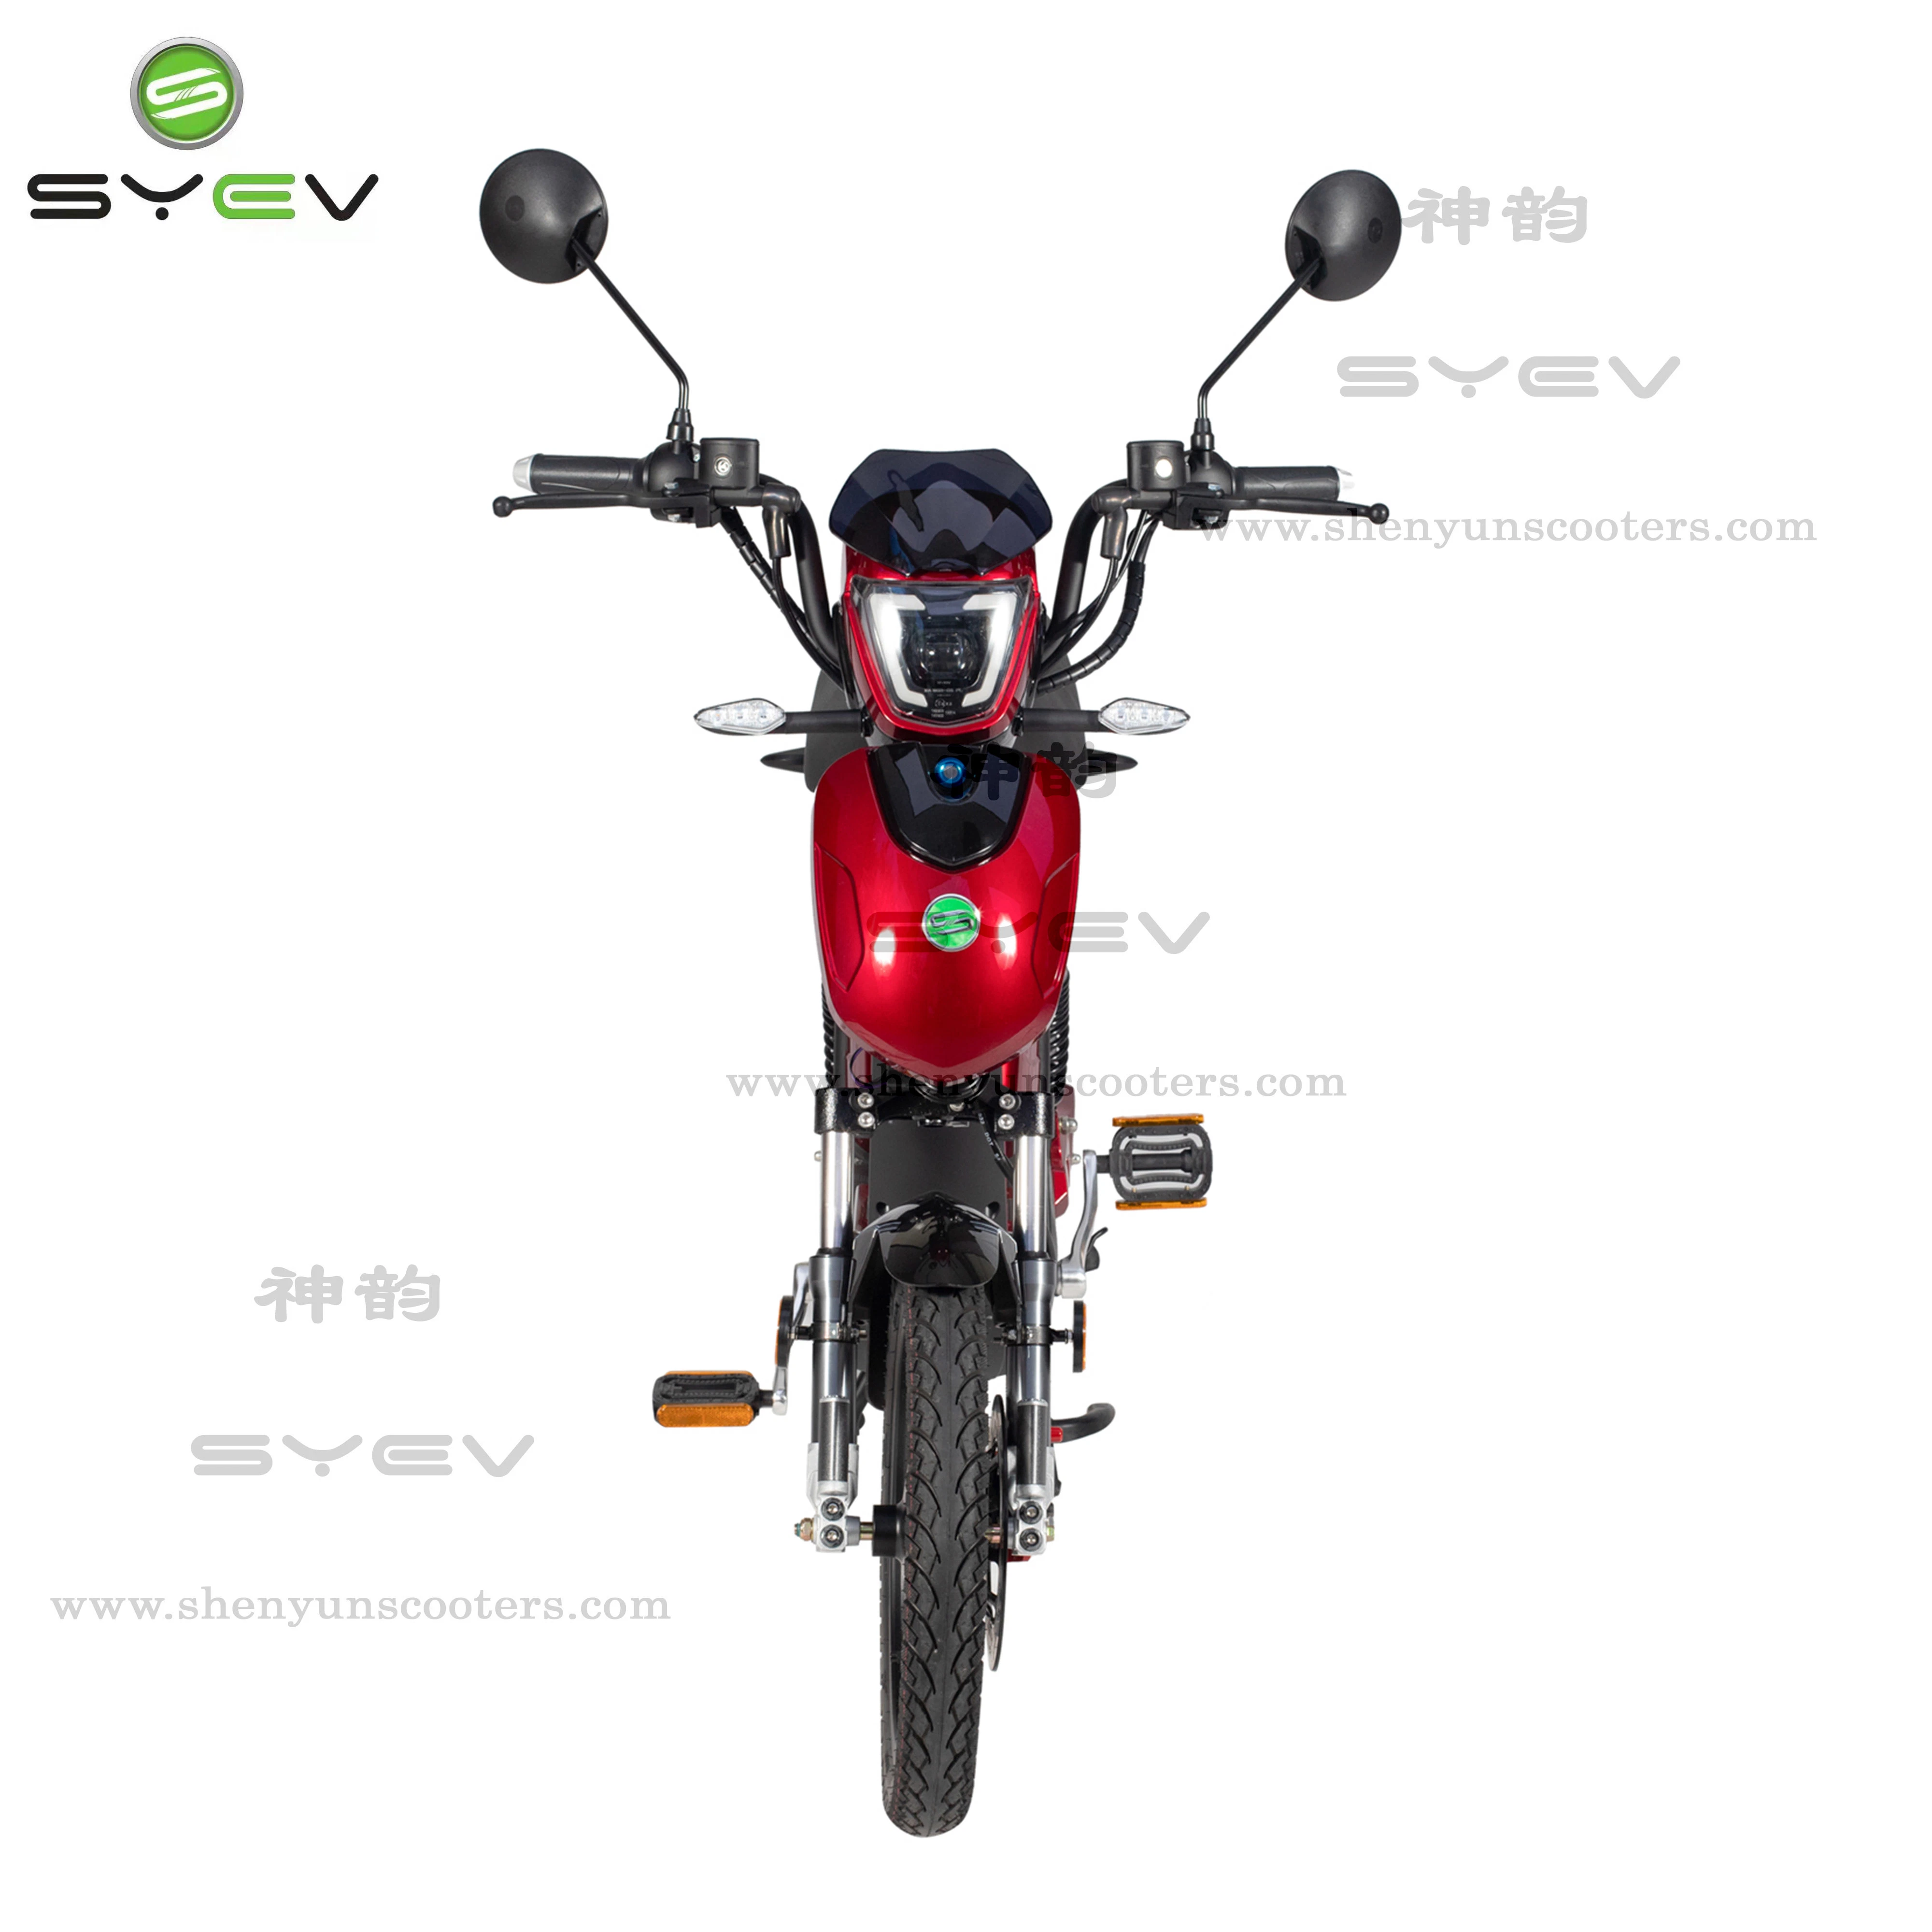 Syev Patent Design City Electric Bike EEC E-Scooter Powerful 800W E-Motorcycle with Portable 48V12ah Battery for Commute